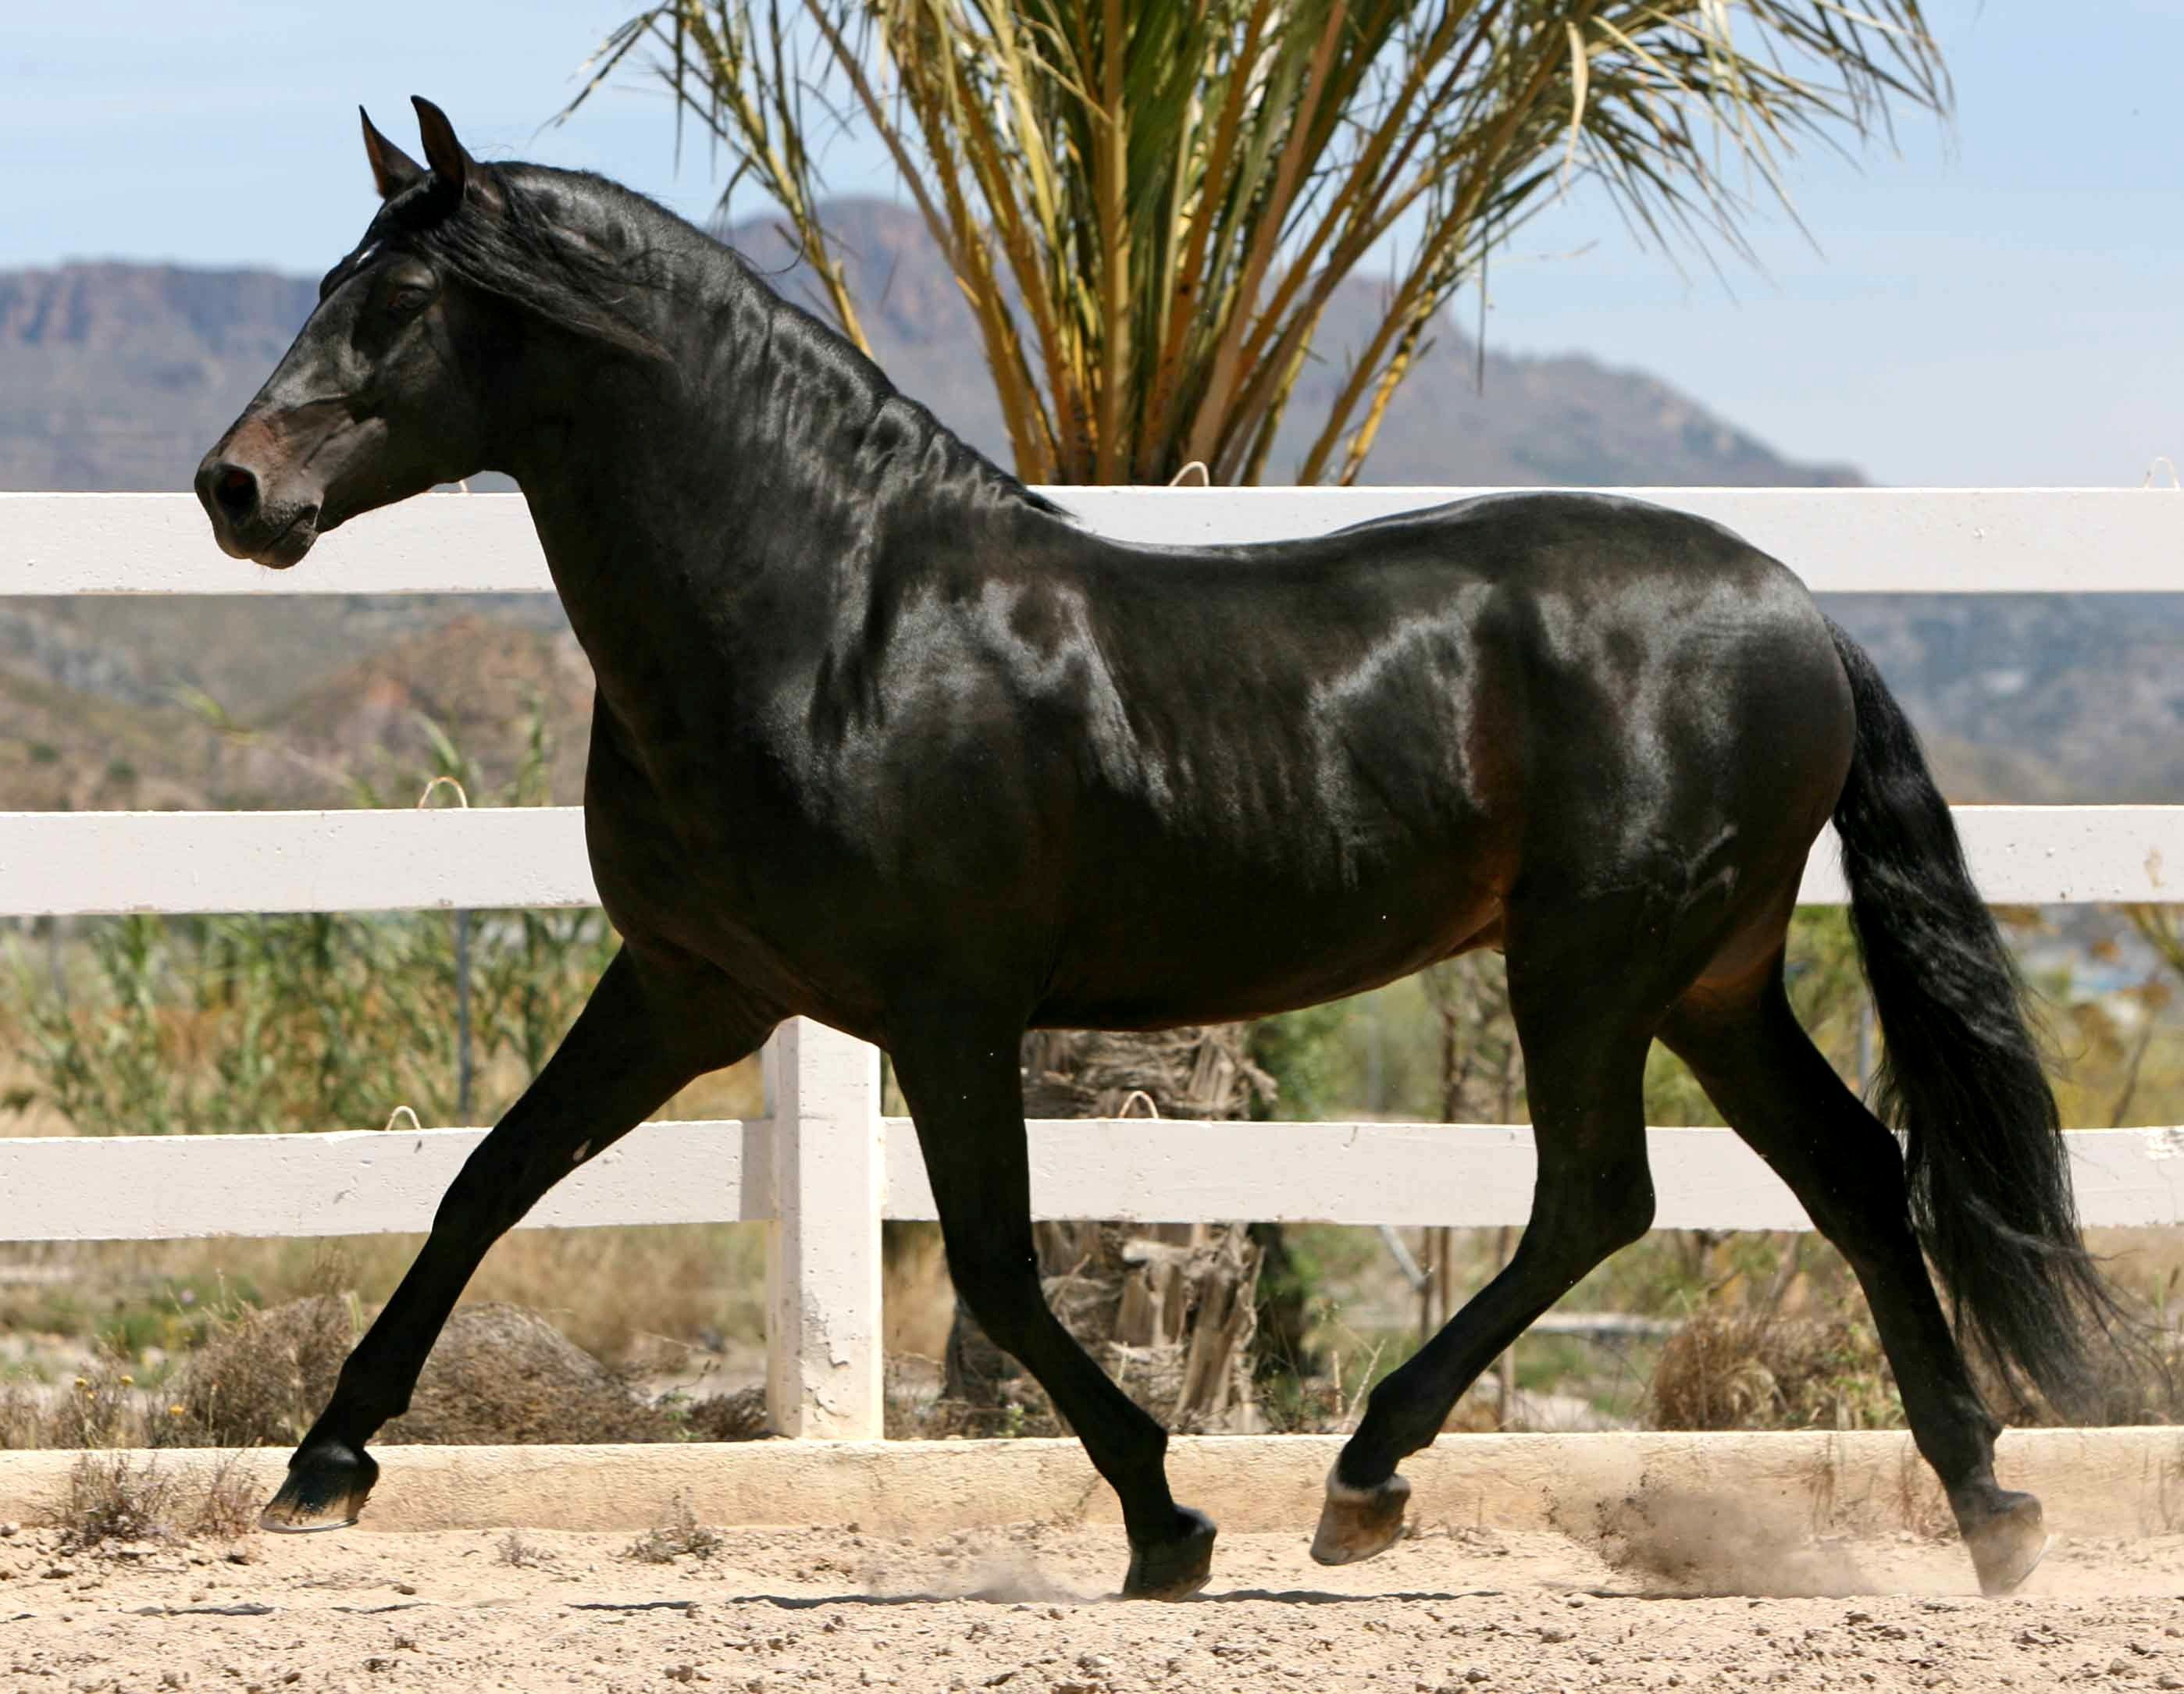 Horse HD wallpaper andalusian horse image cool wallpaper. Andalusian horse, Horses, Black horses